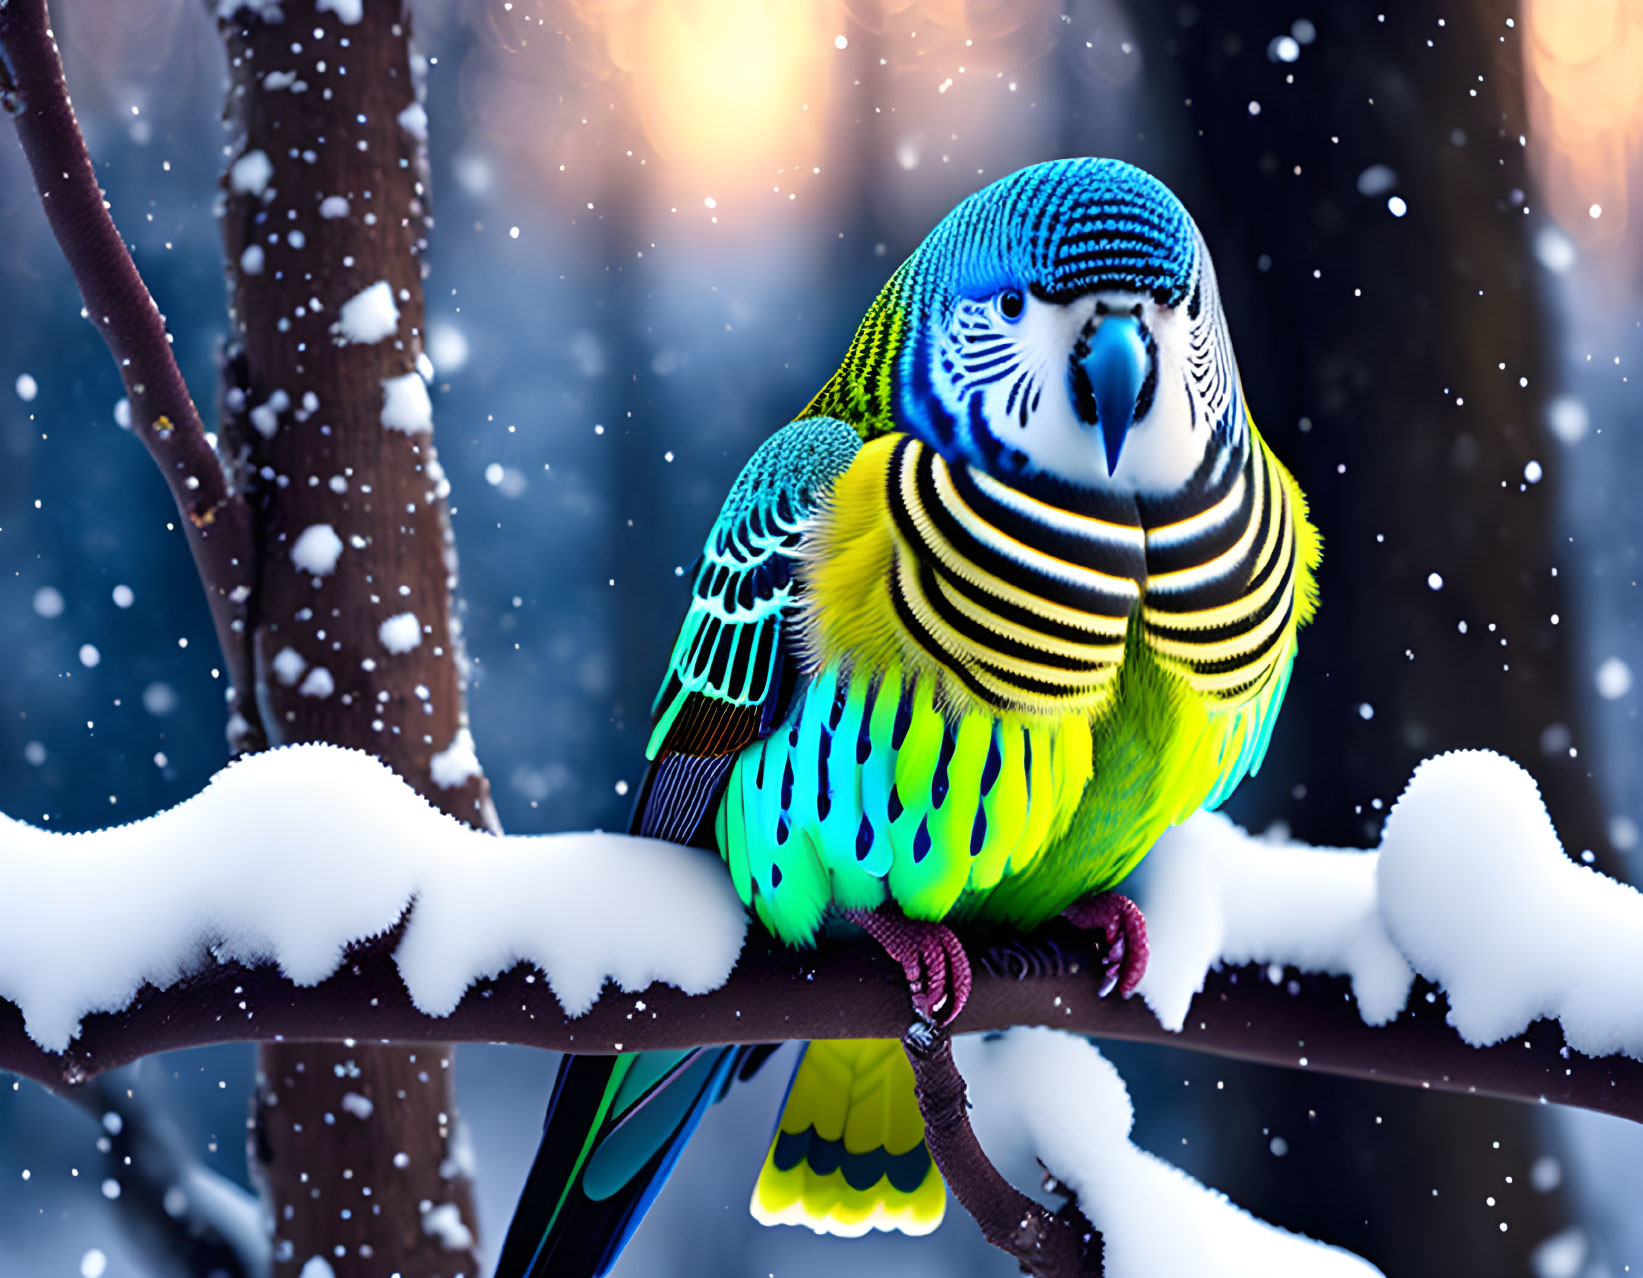 Colorful Budgerigar Perched on Snow-Covered Branch in Winter Forest